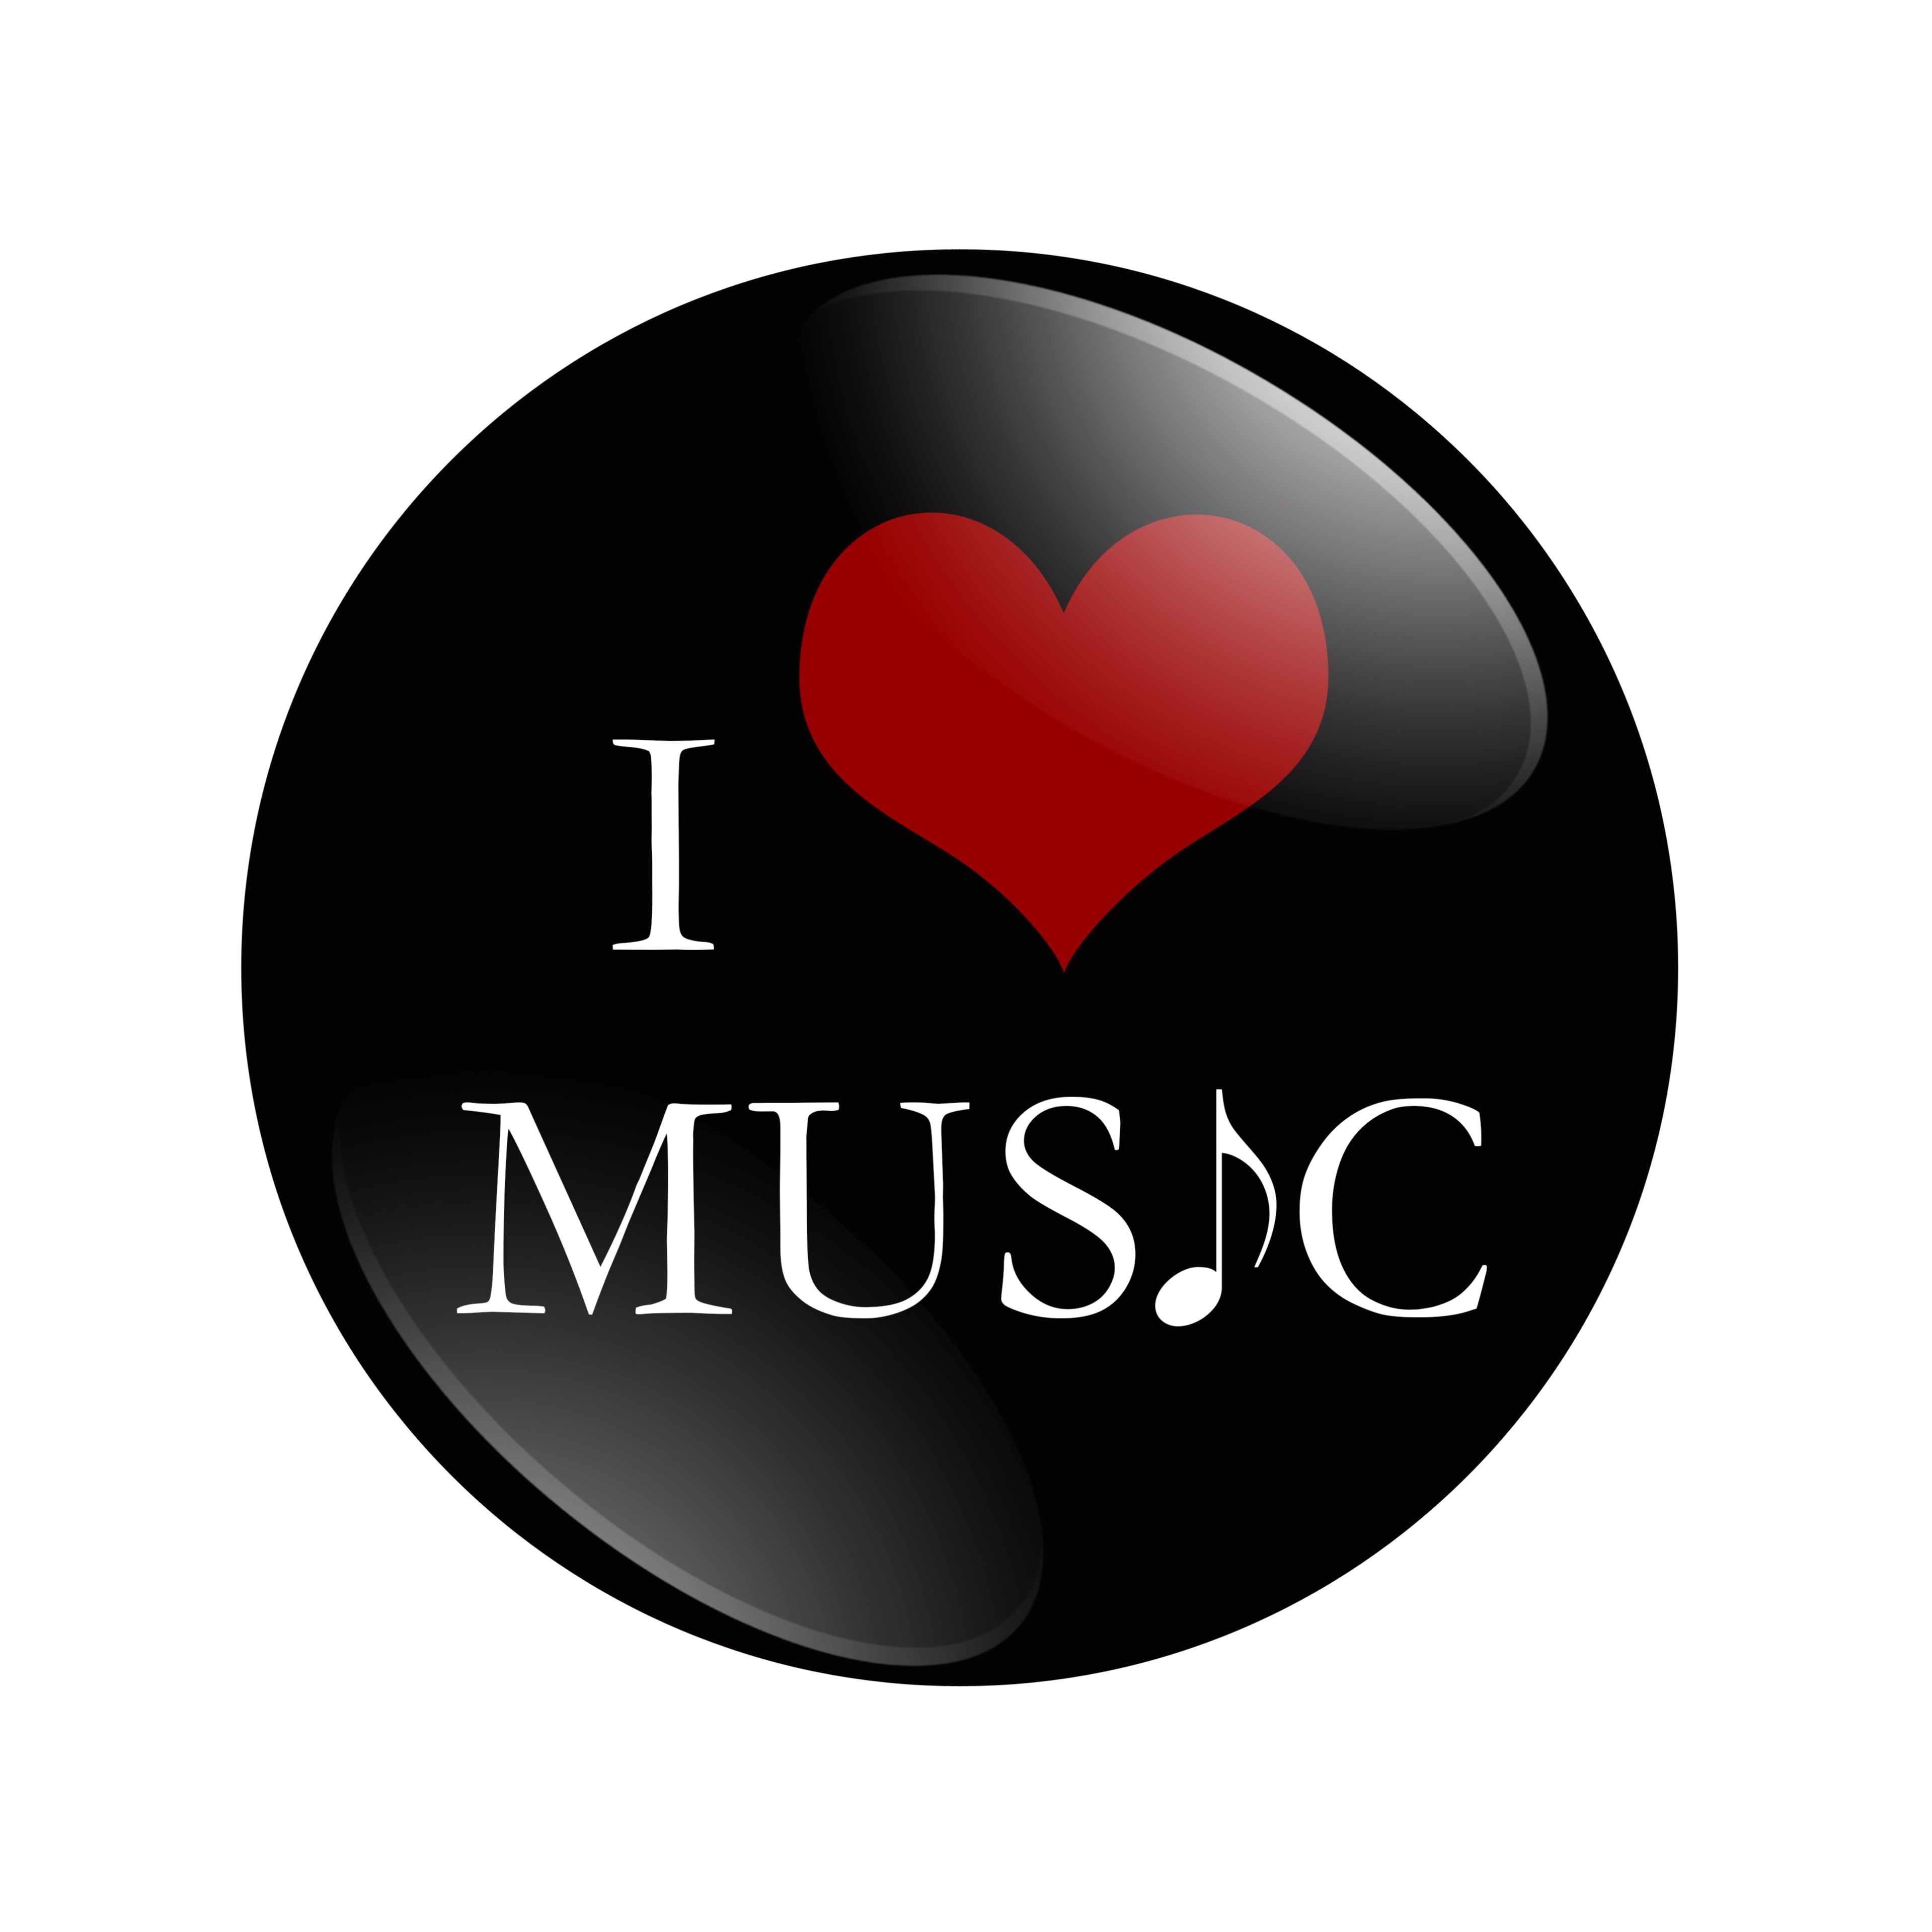 
FOR THE LOVE OF MUSIC